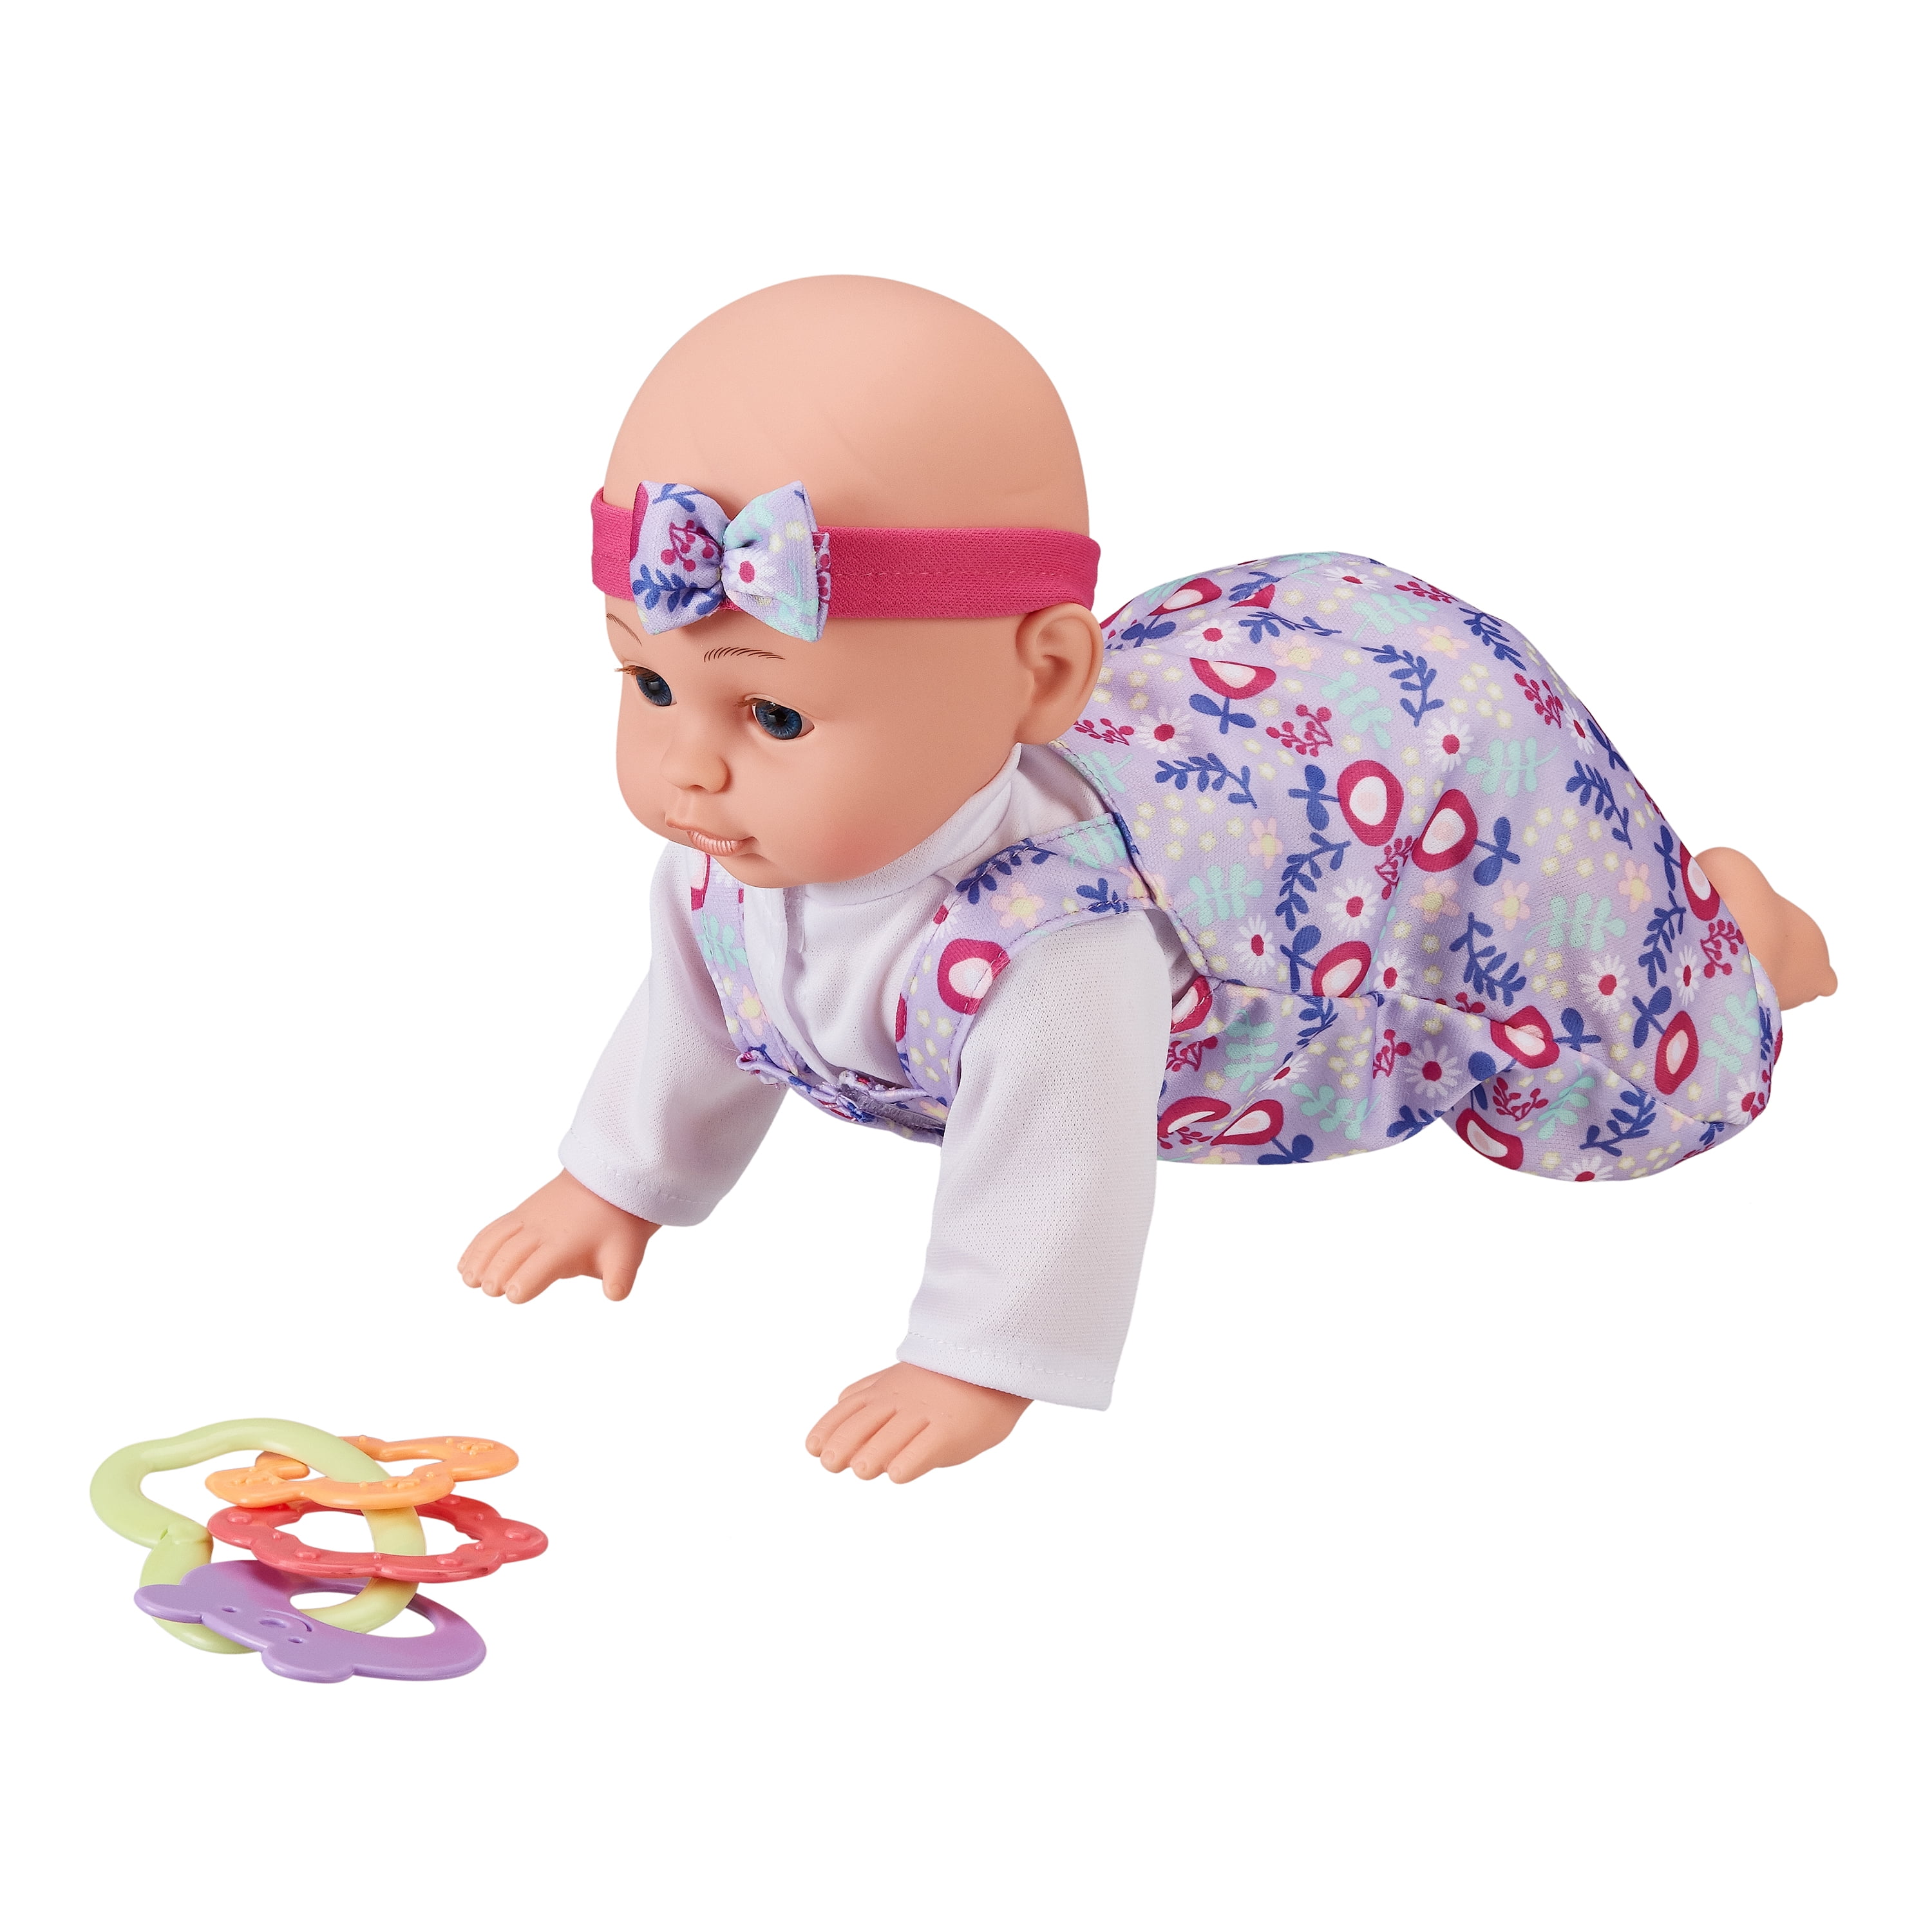 My Sweet Love Crawling Baby Toy Set, 2 Pieces - Walmart.com